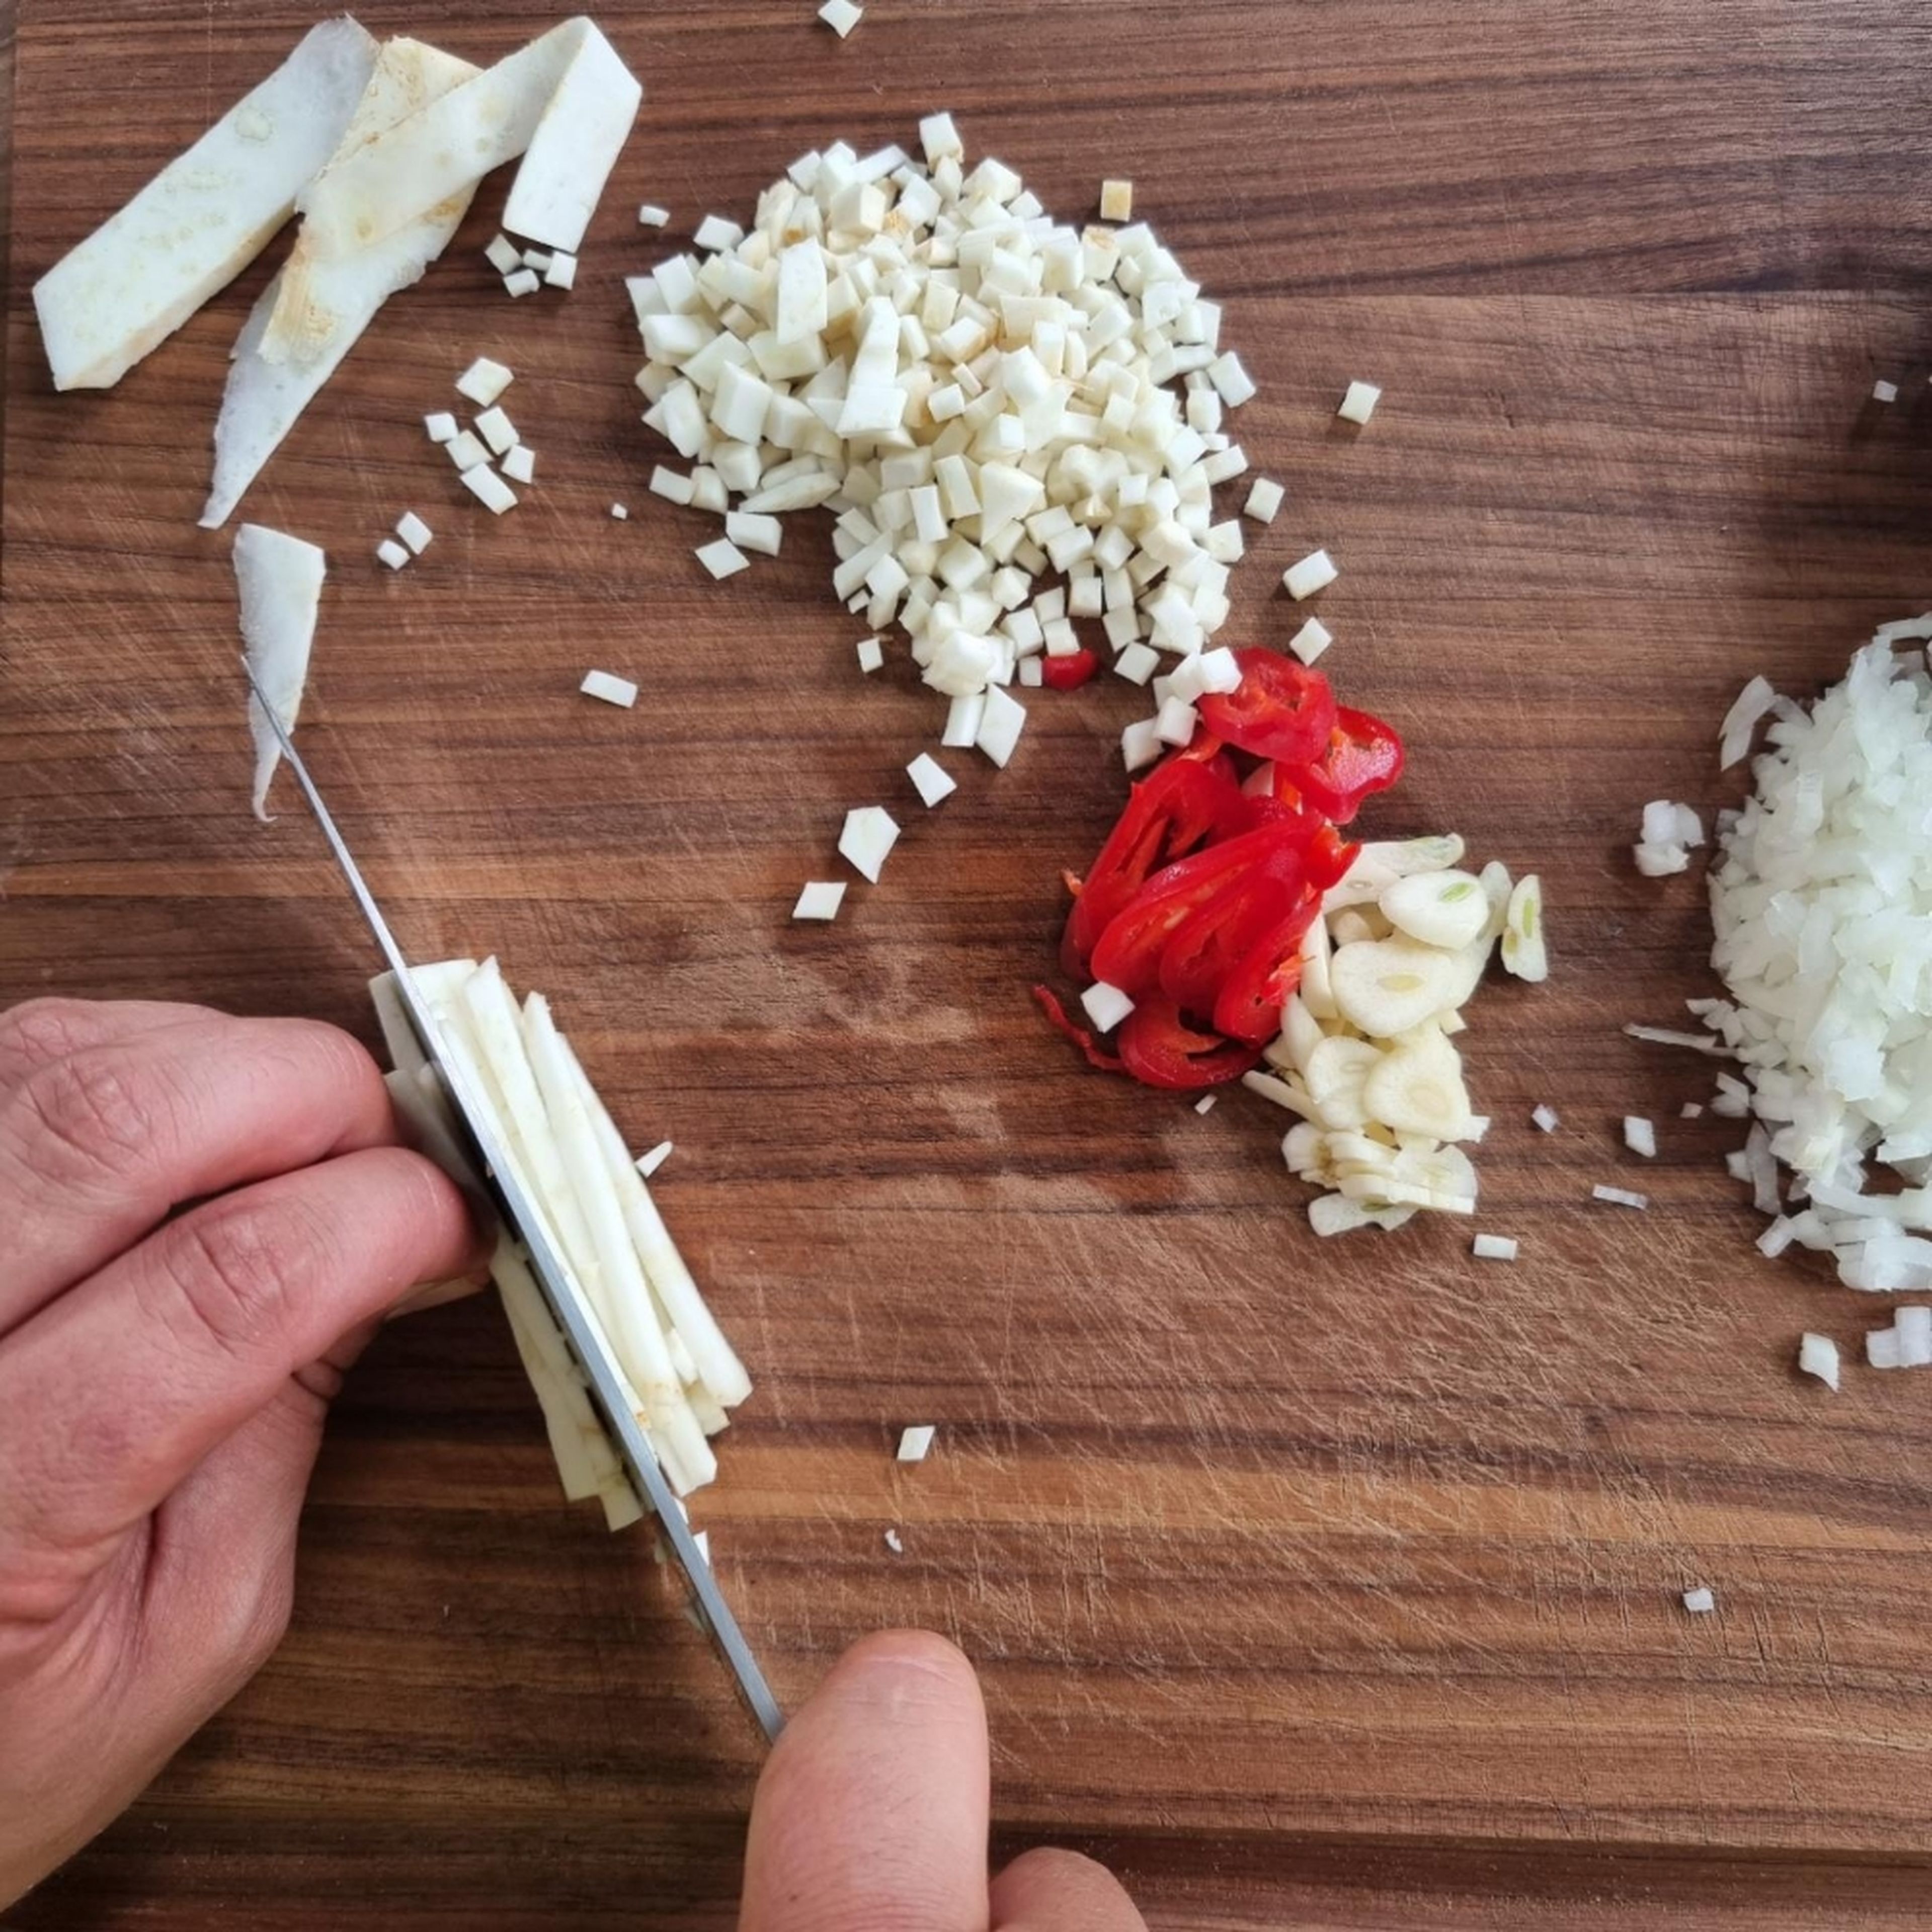 Cook the soy granules according to package directions and pat them dry.
Finely dice the celery root, garlic and onion. Cut the chili into slices.